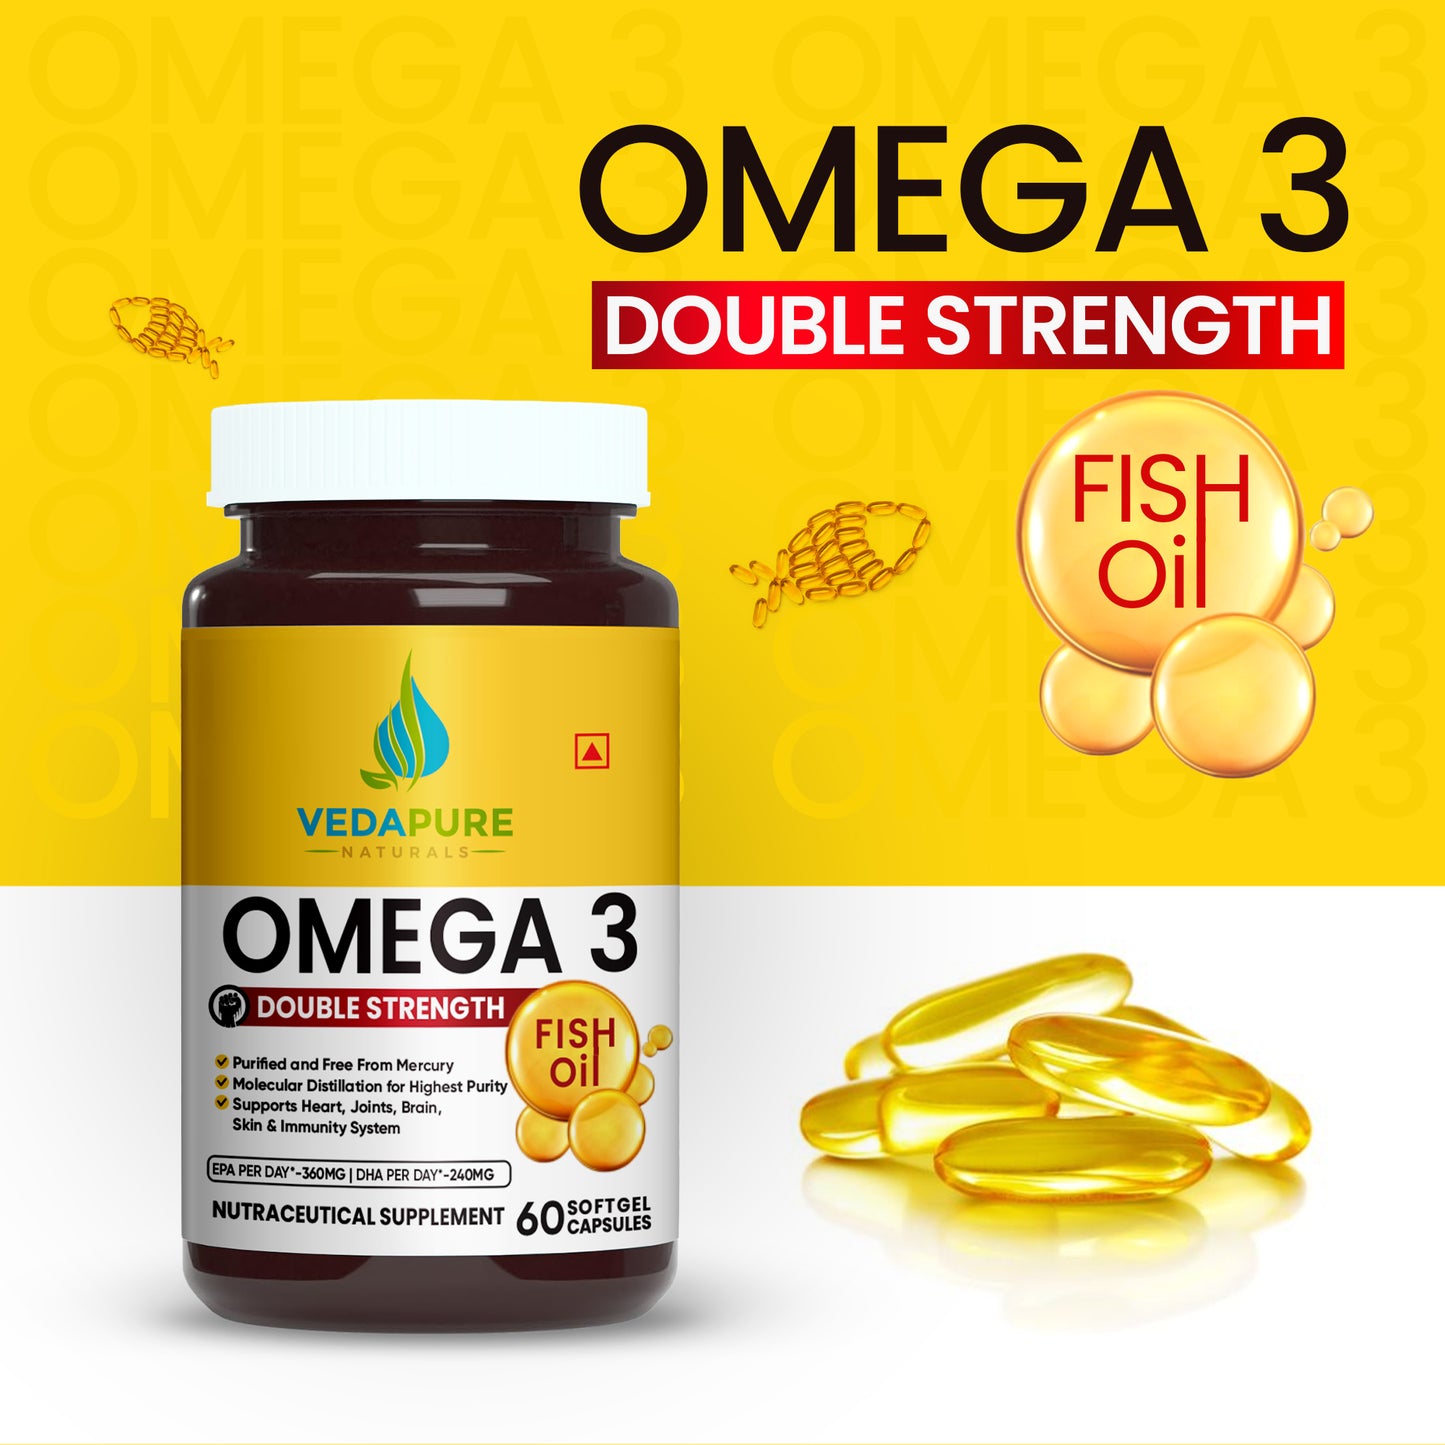 VEDAPURE NATURALS Double Strength Omega 3 Fish Oil 1000mg- 60 Softgel Vedapure Naturals